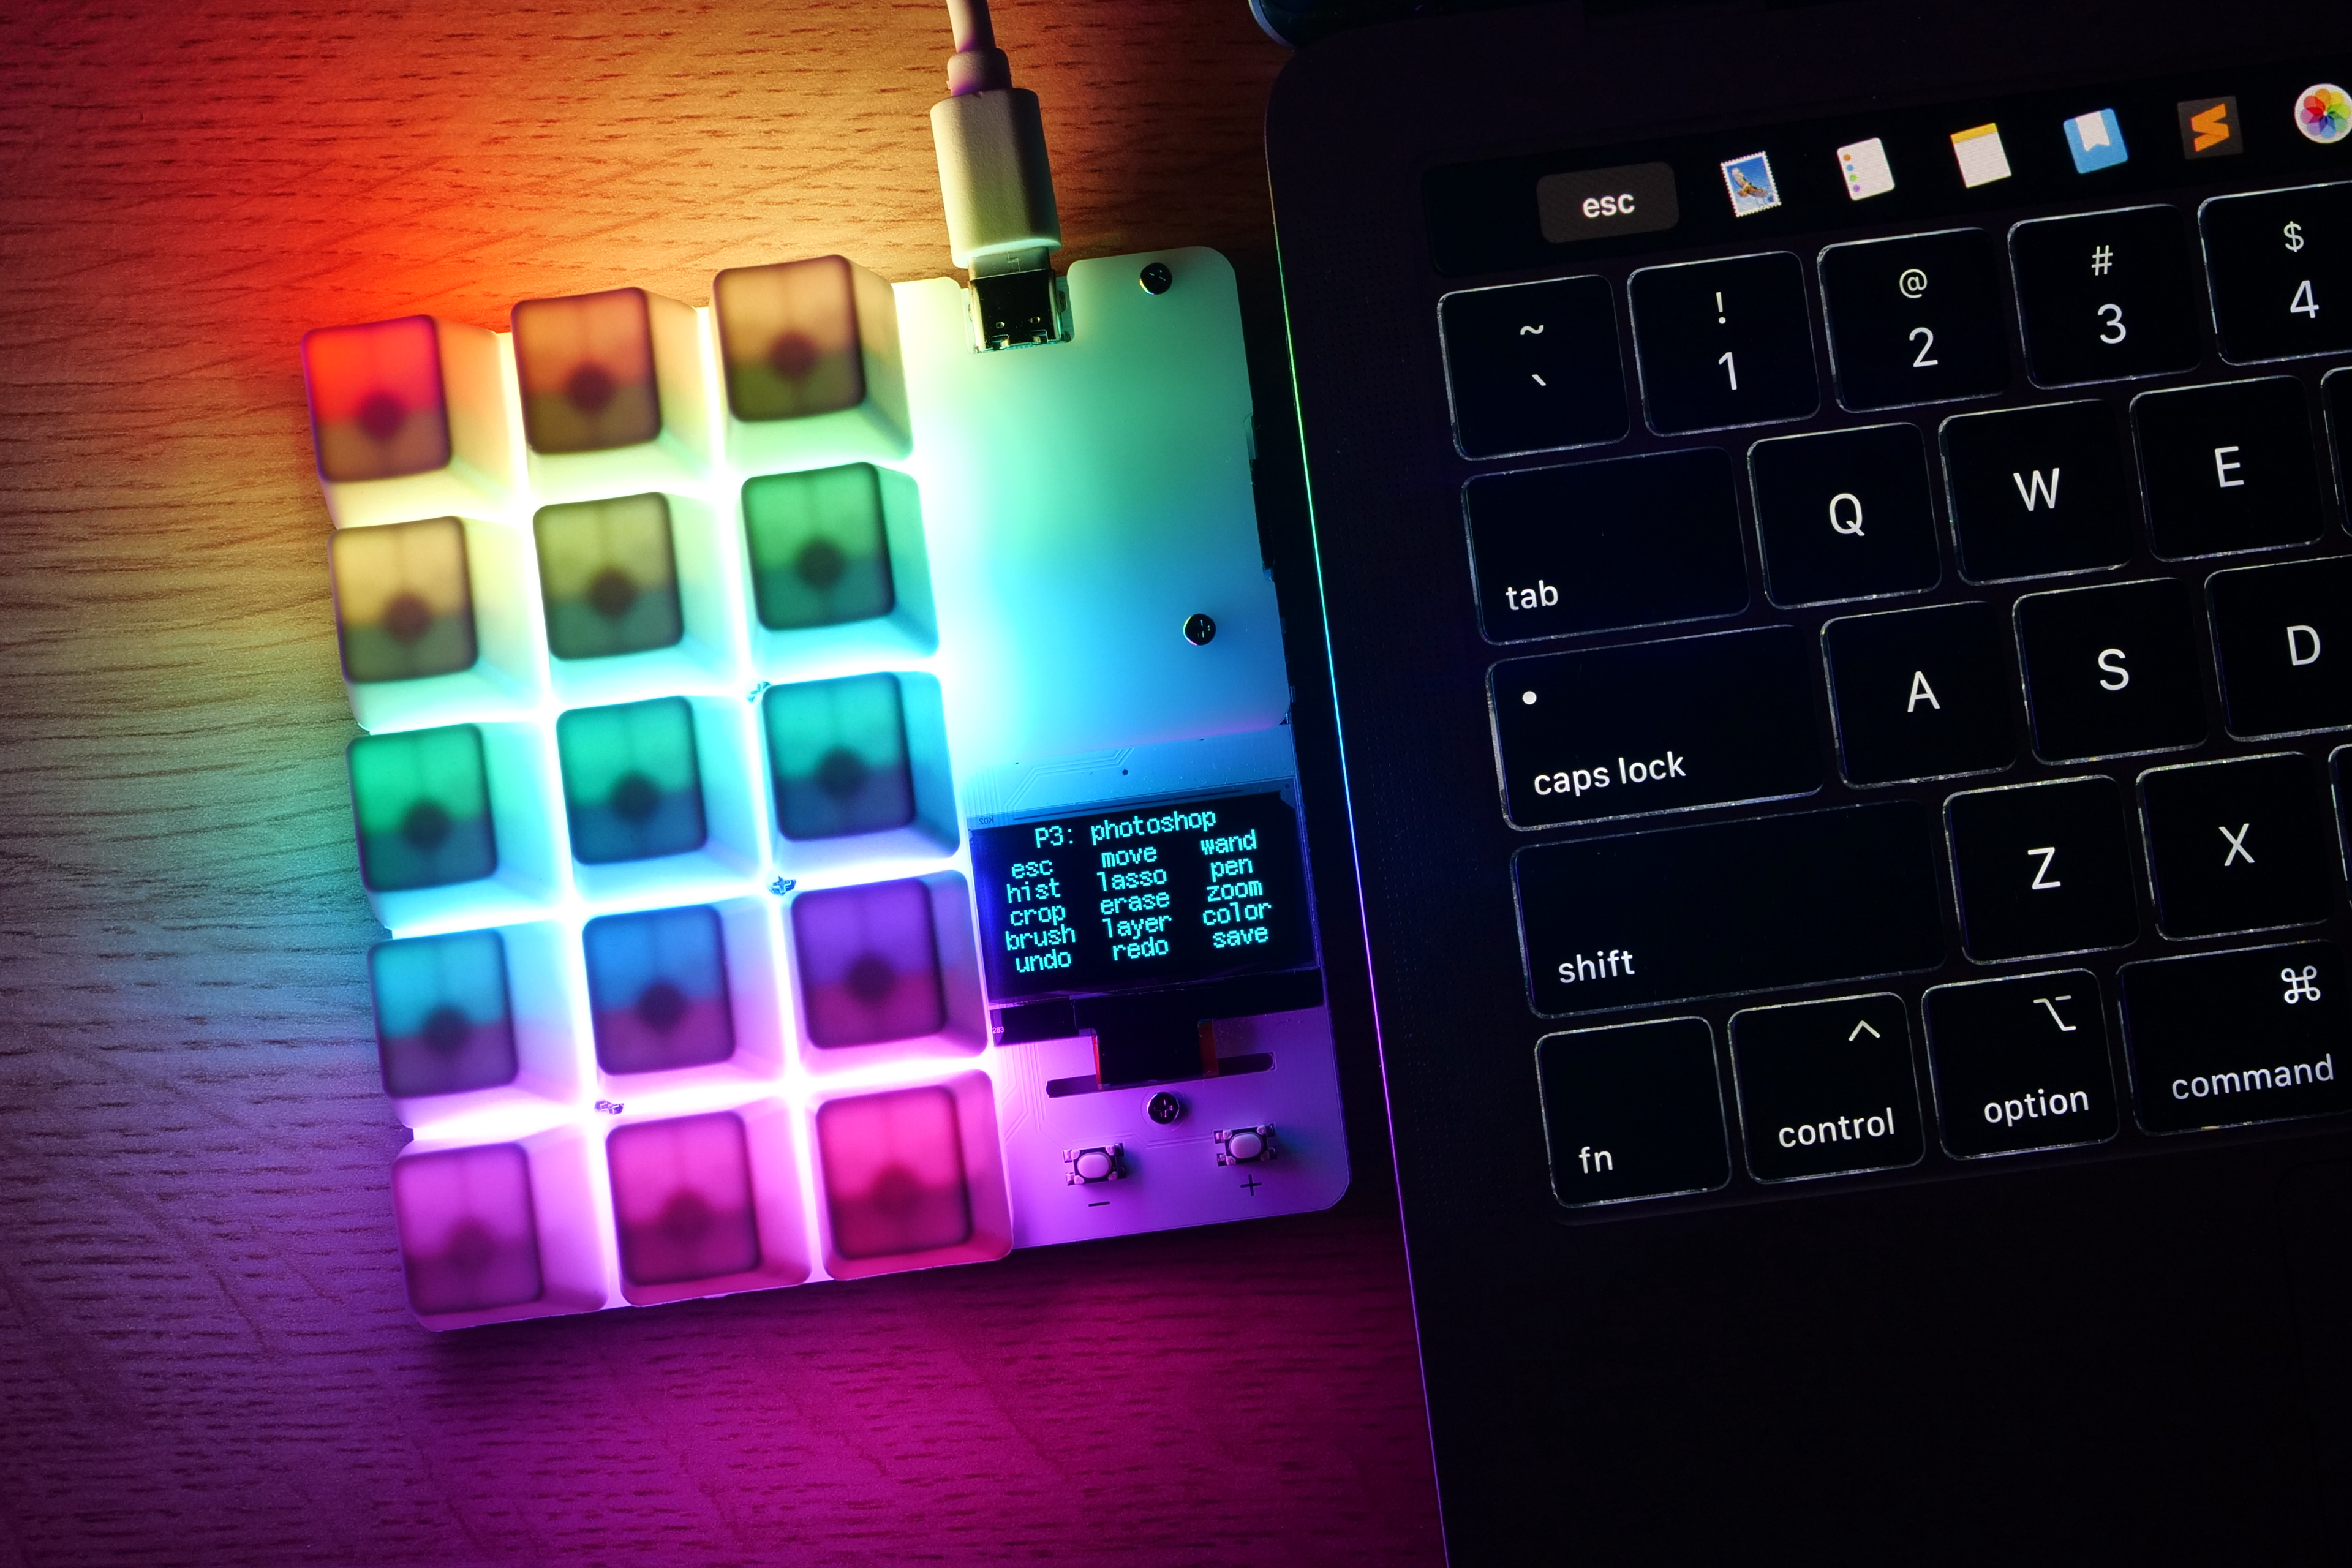 Hot Keyboards: Find Cool Kits or Build The DuckyPad